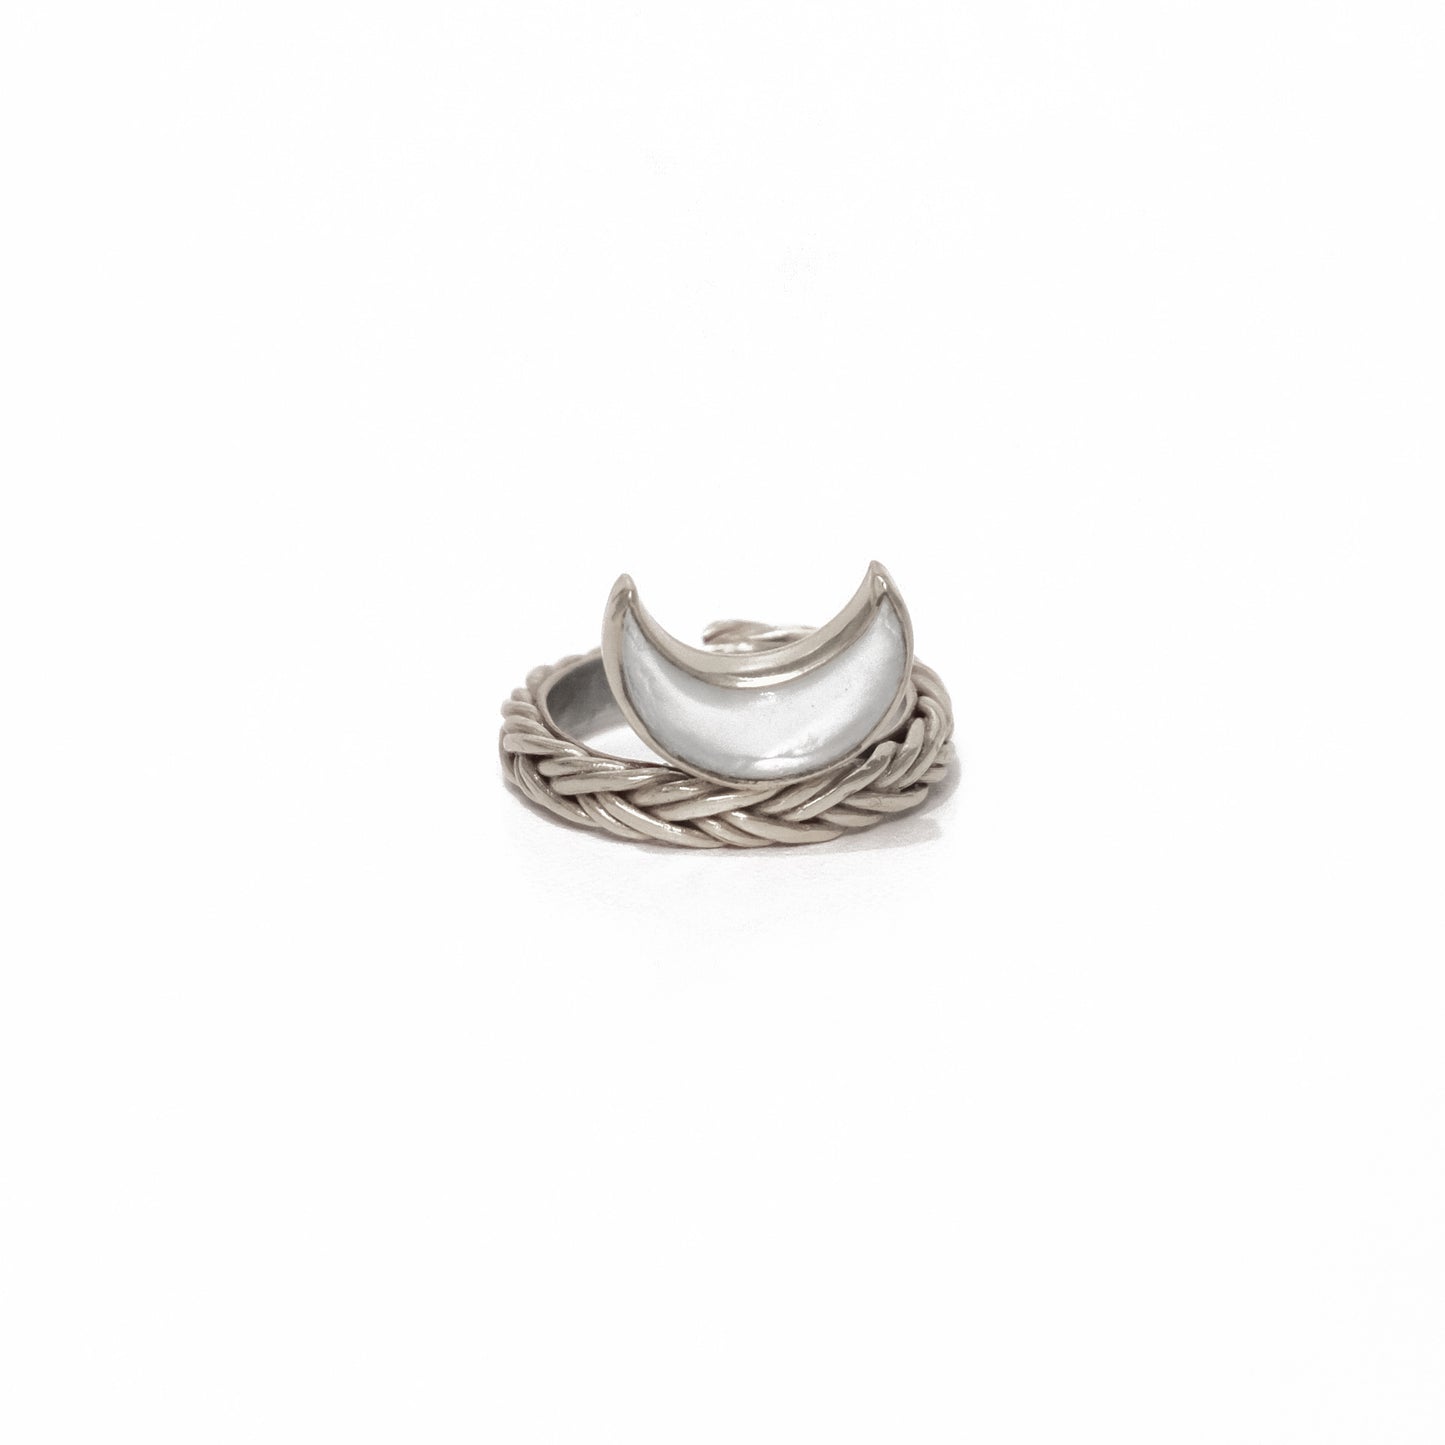 The BRAIDED LUNA Ring